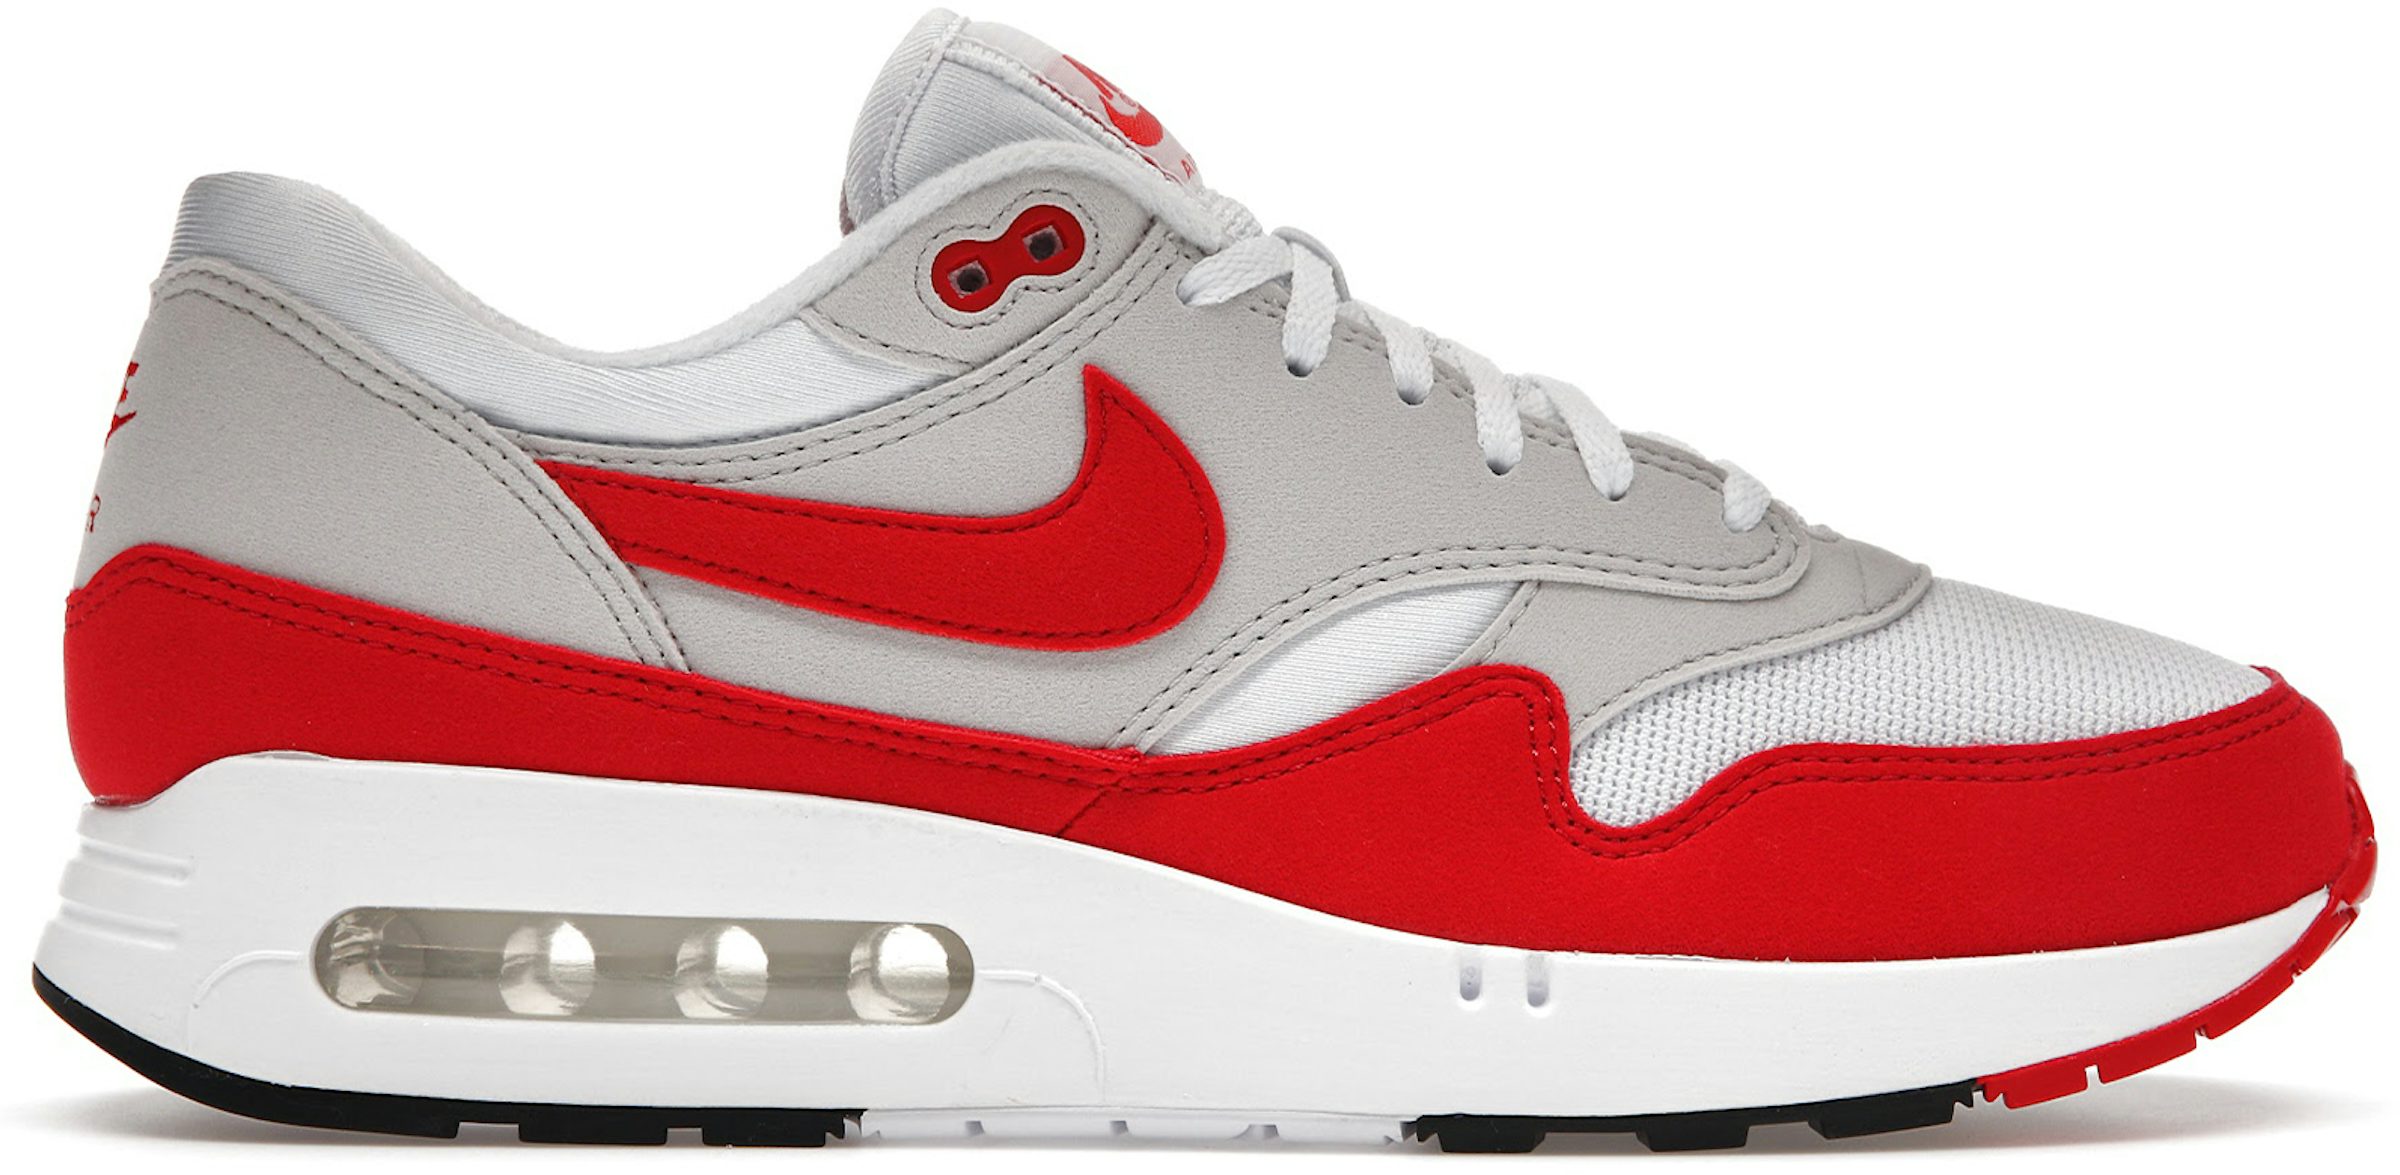 Nike Air Max 90 G Golf Shoes White/University Red M 10